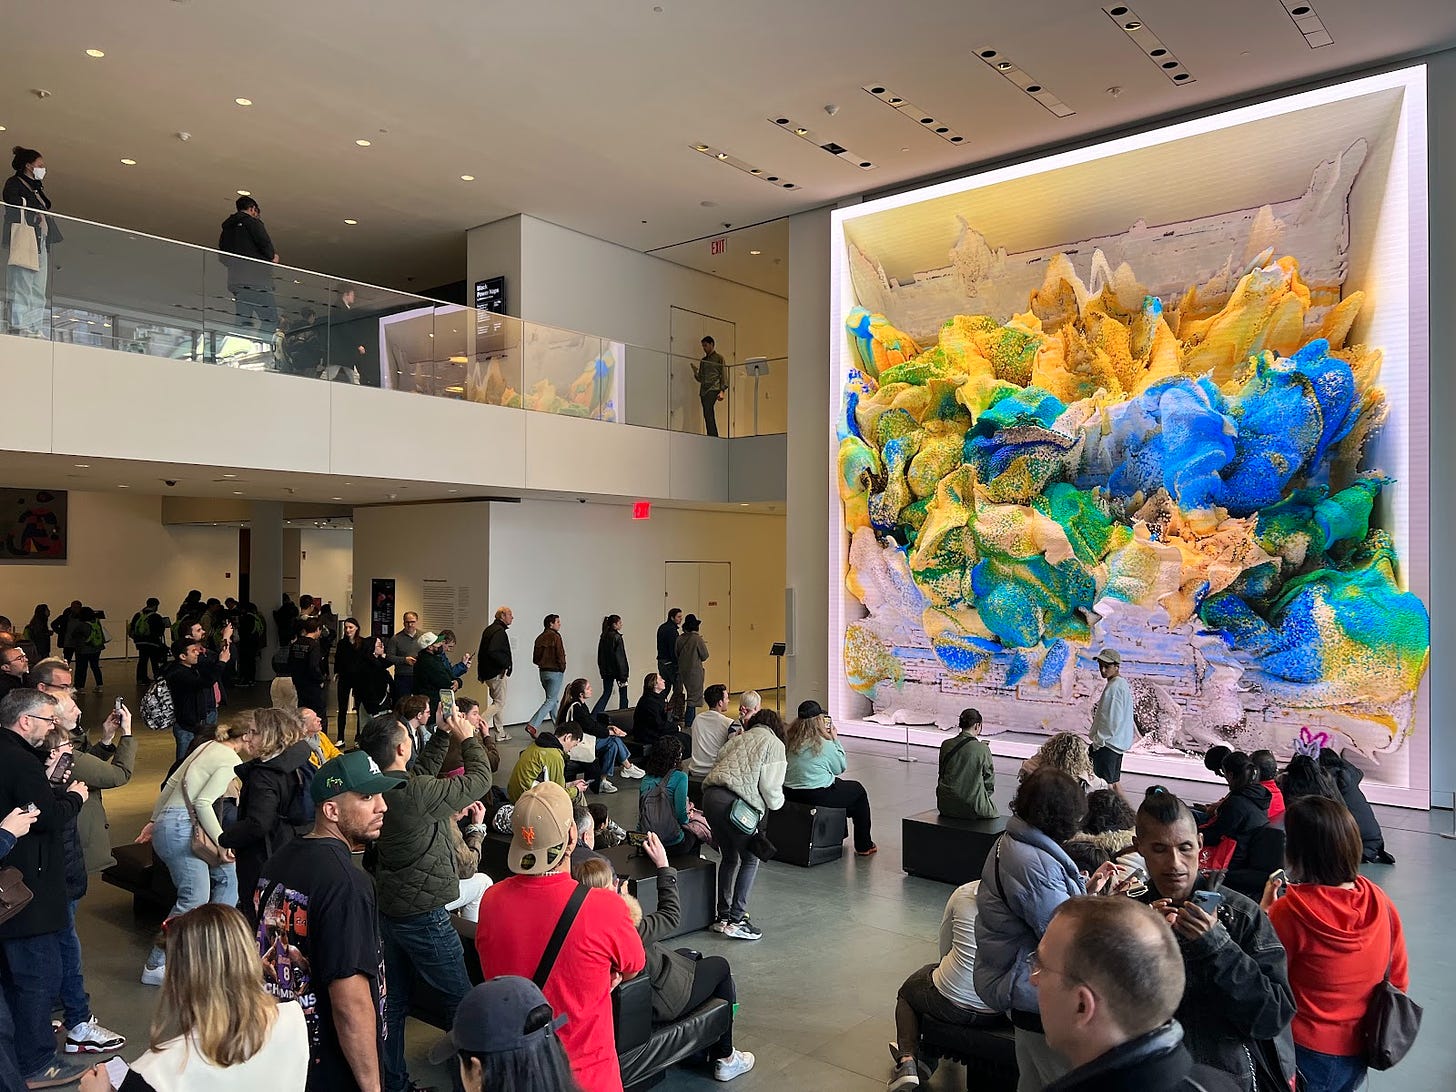 A crowd of visitors gathers in front of Refik Anadol's piece "Unsupervised" at the Museum of Modern Art. The piece has green, yellow, and blue pulsating blobs, and is two stories tall